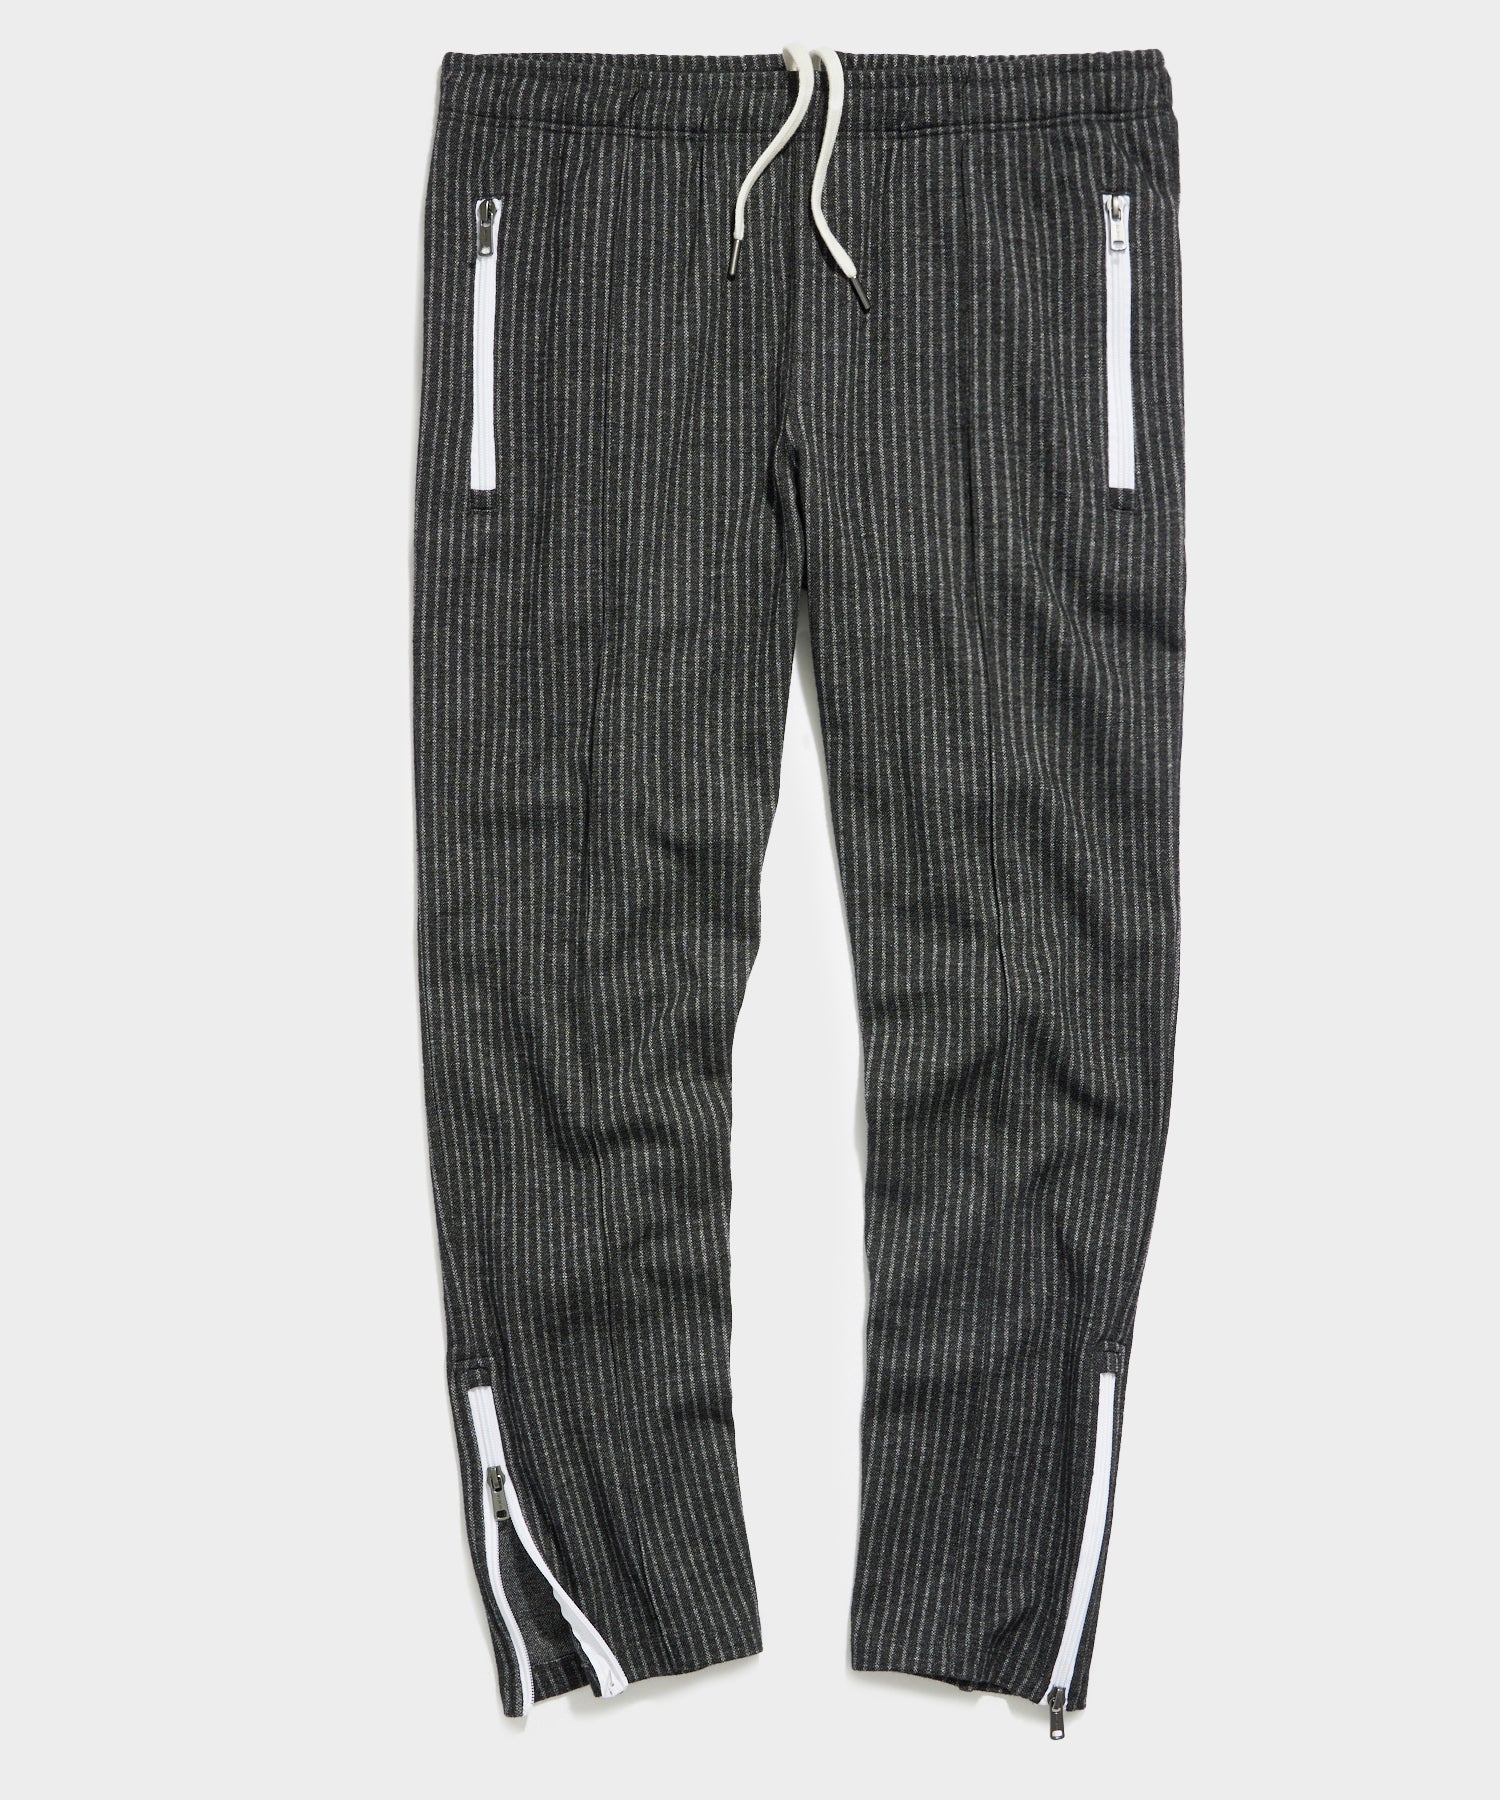 Chalk Stripe Pintuck Pant in Charcoal